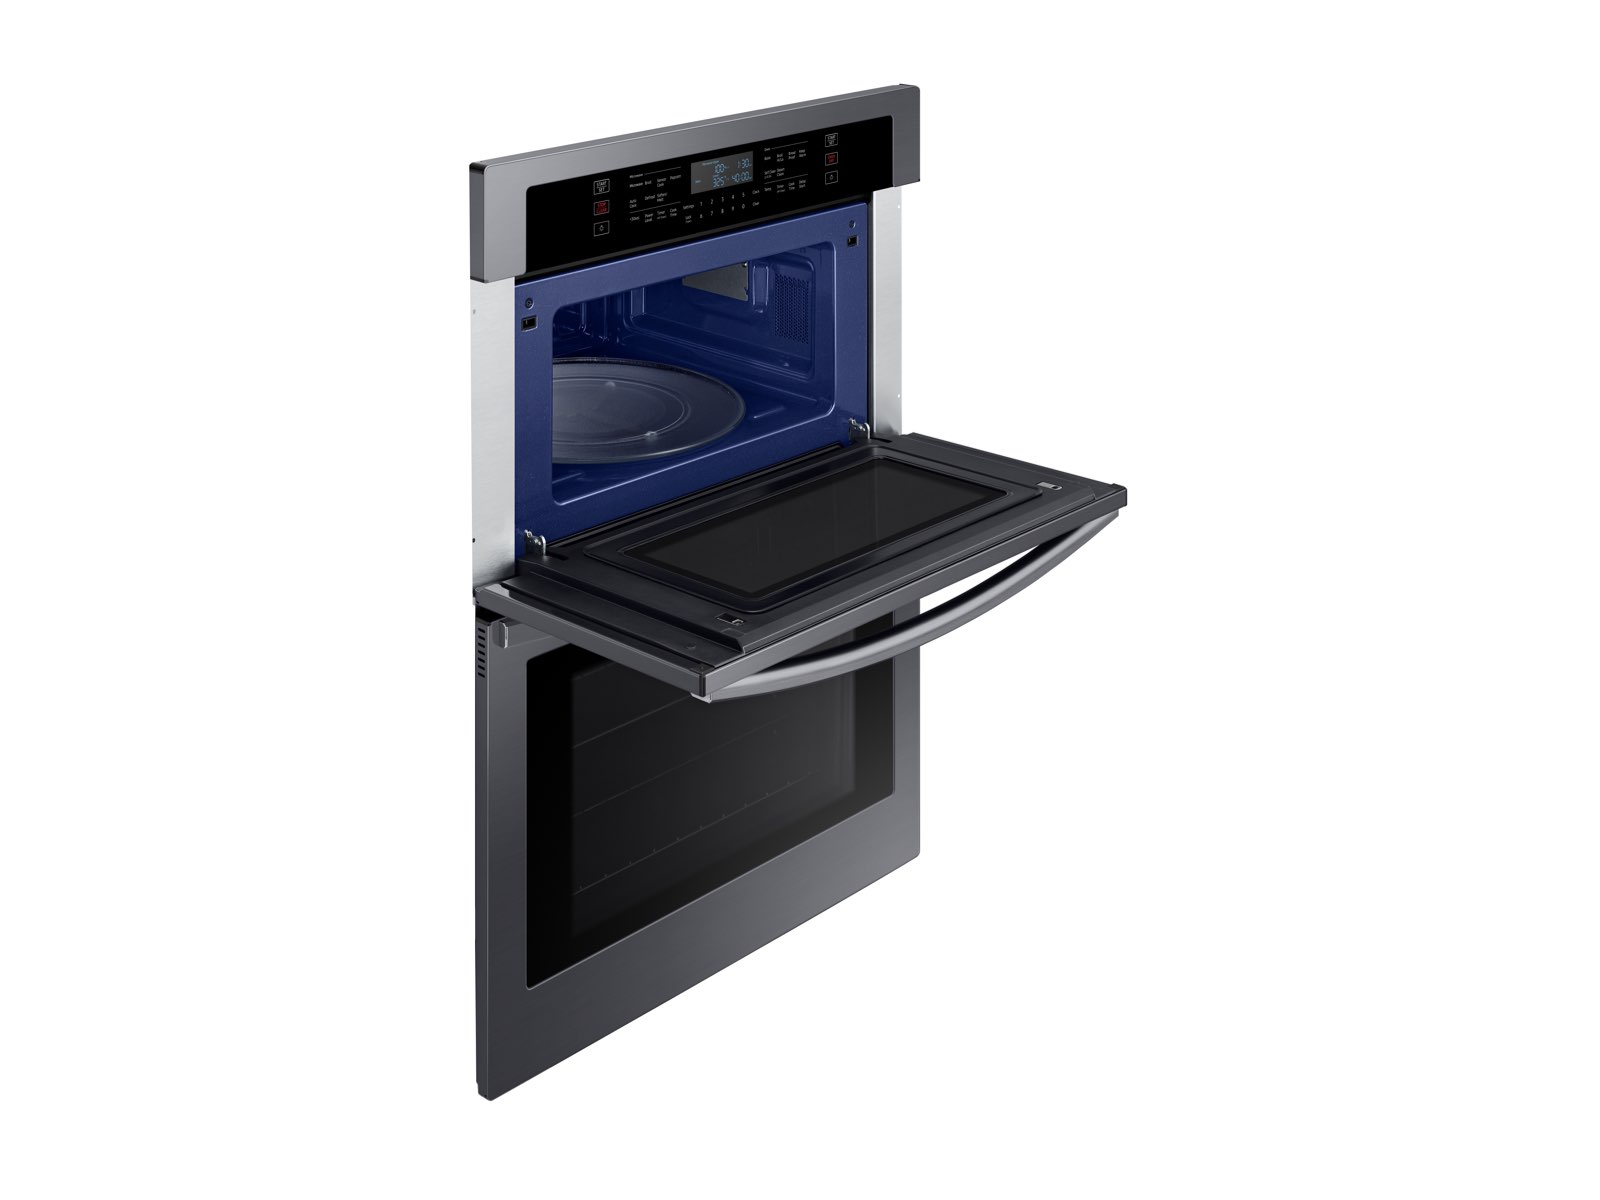 https://image-us.samsung.com/SamsungUS/home/home-appliances/wall-ovens/microwave-combination-oven/pdp/nq70r5511dg-aa/gallery/NQ70R5511DG_12.jpg?$product-details-jpg$